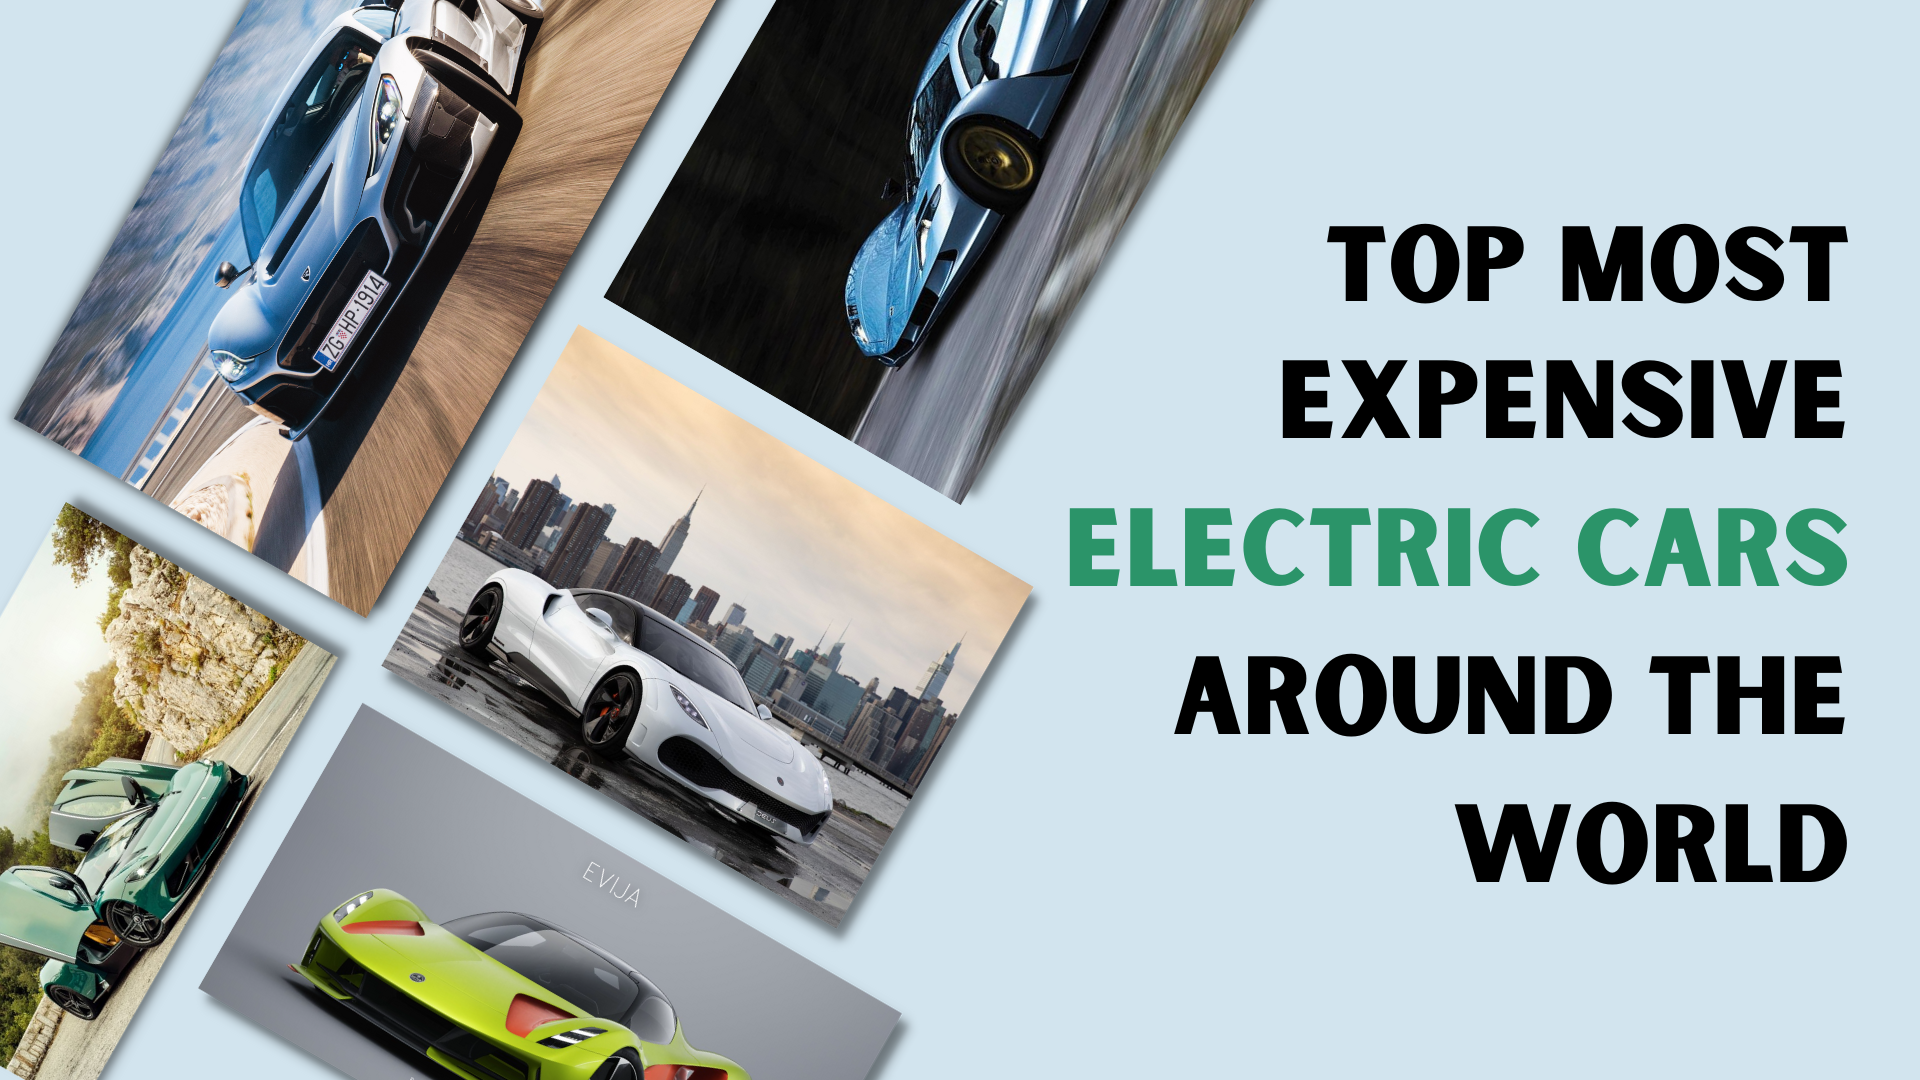 https://e-vehicleinfo.com/global/top-5-most-expensive-electric-cars-around-the-world/